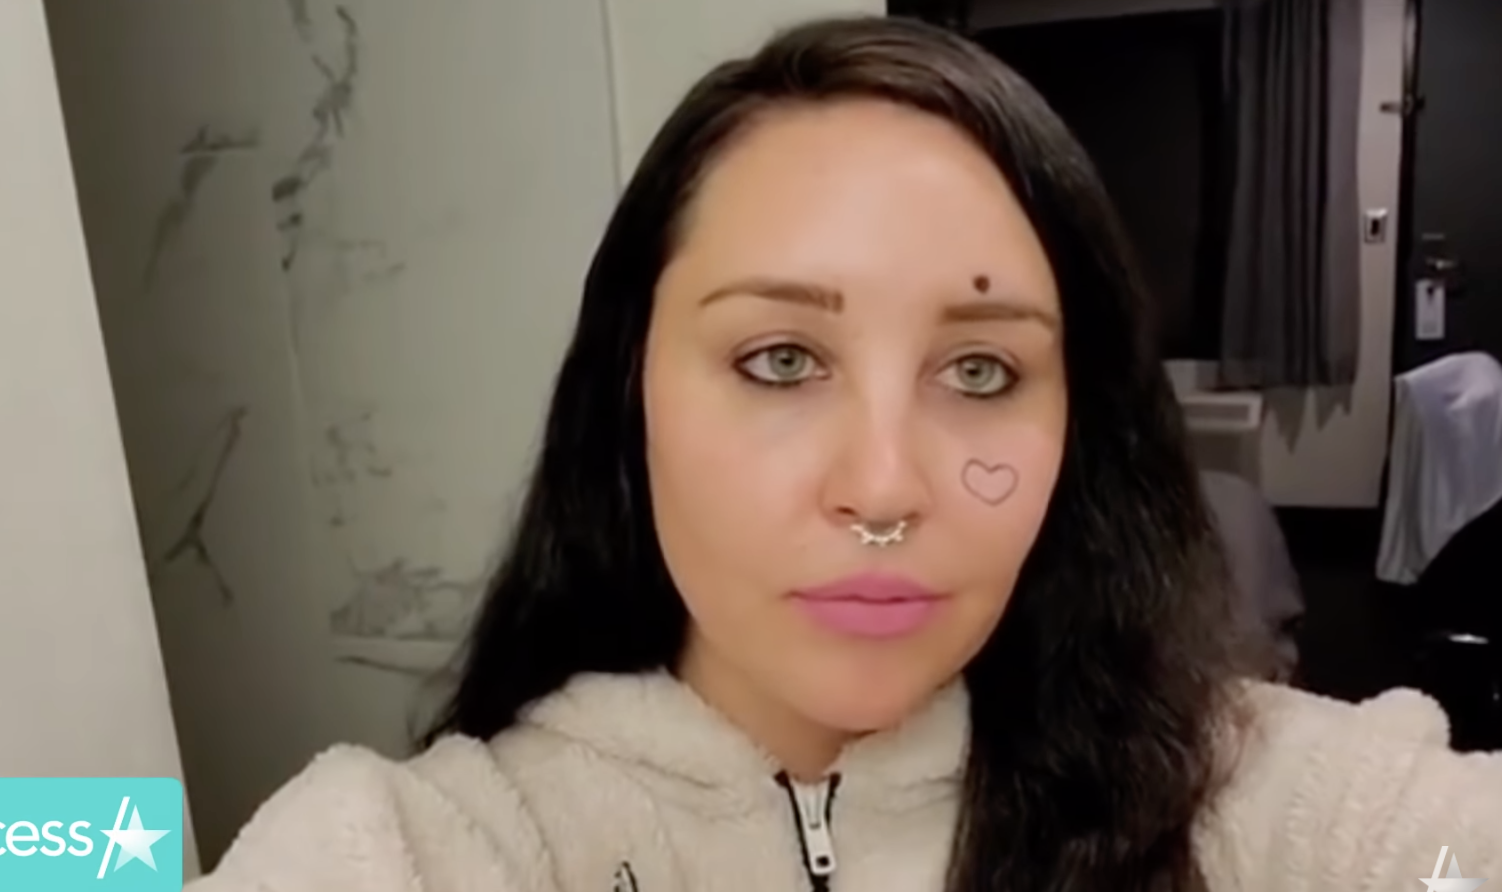 A selfie of Amanda Bynes with dark hair and a heart tattooed on her face